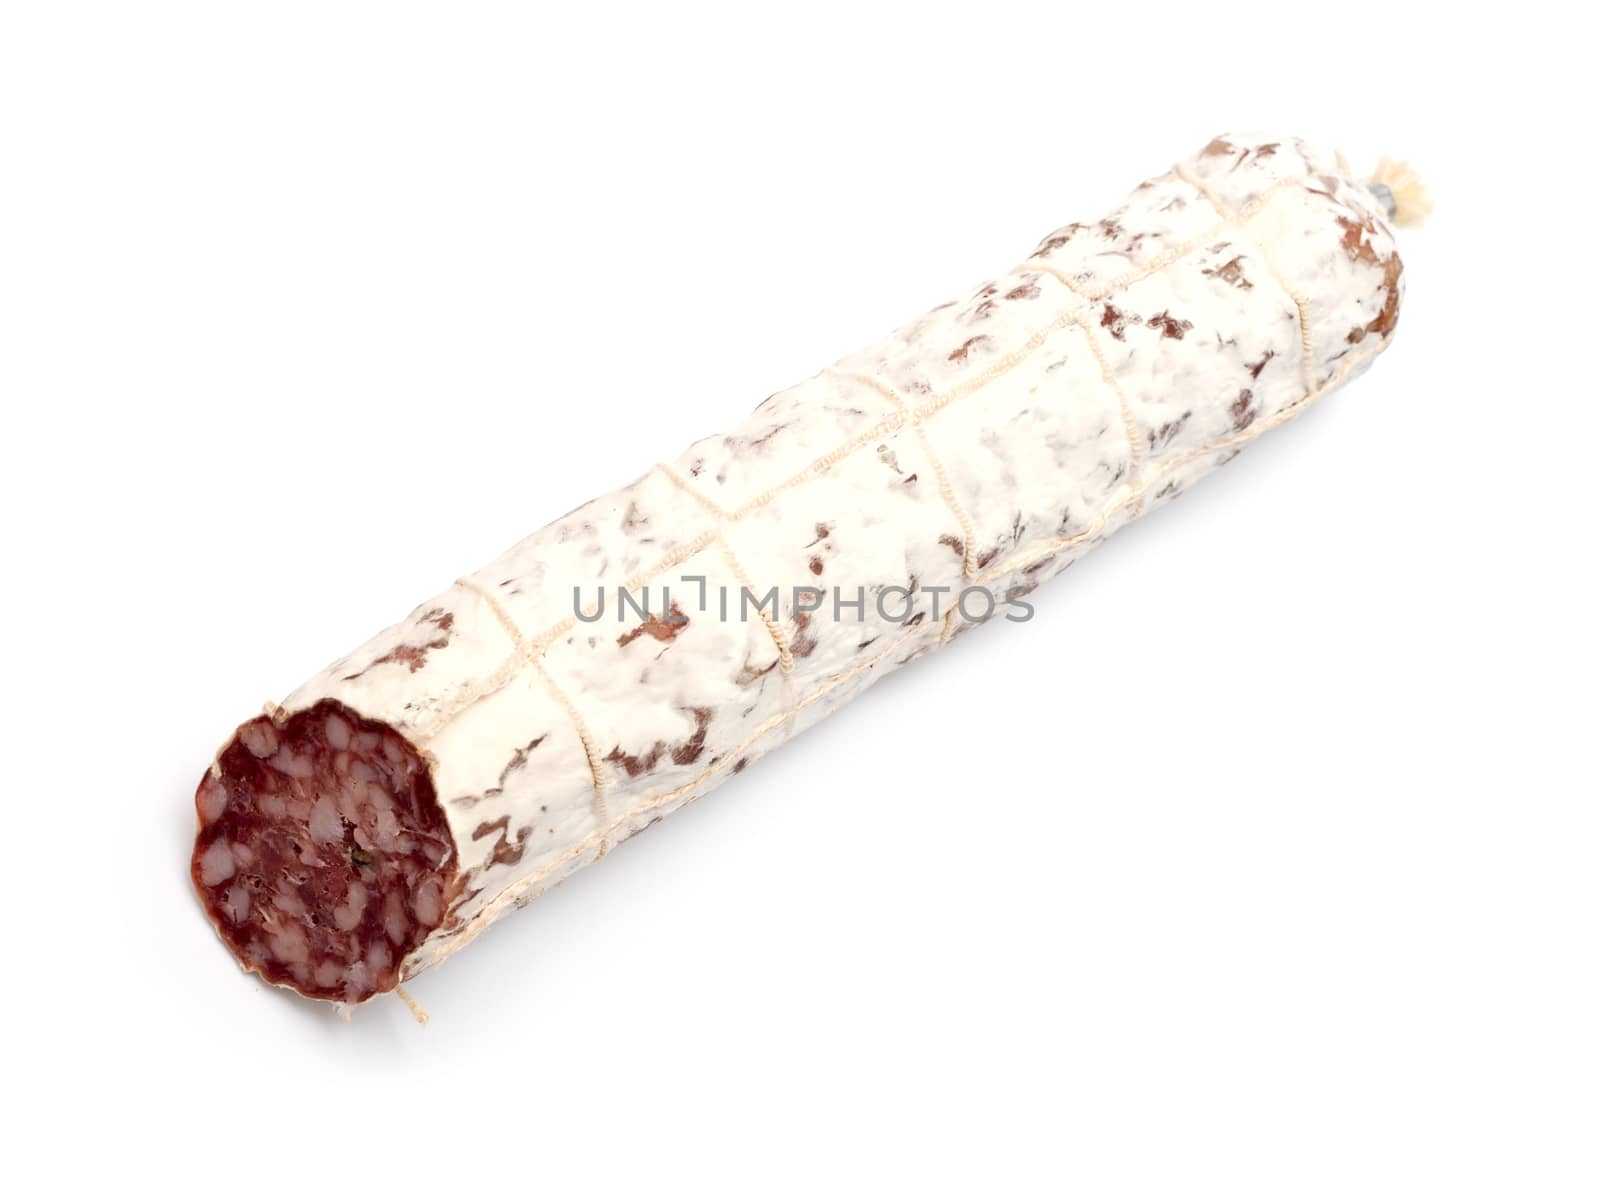 Smoked sausage stick isolated on white background by DNKSTUDIO